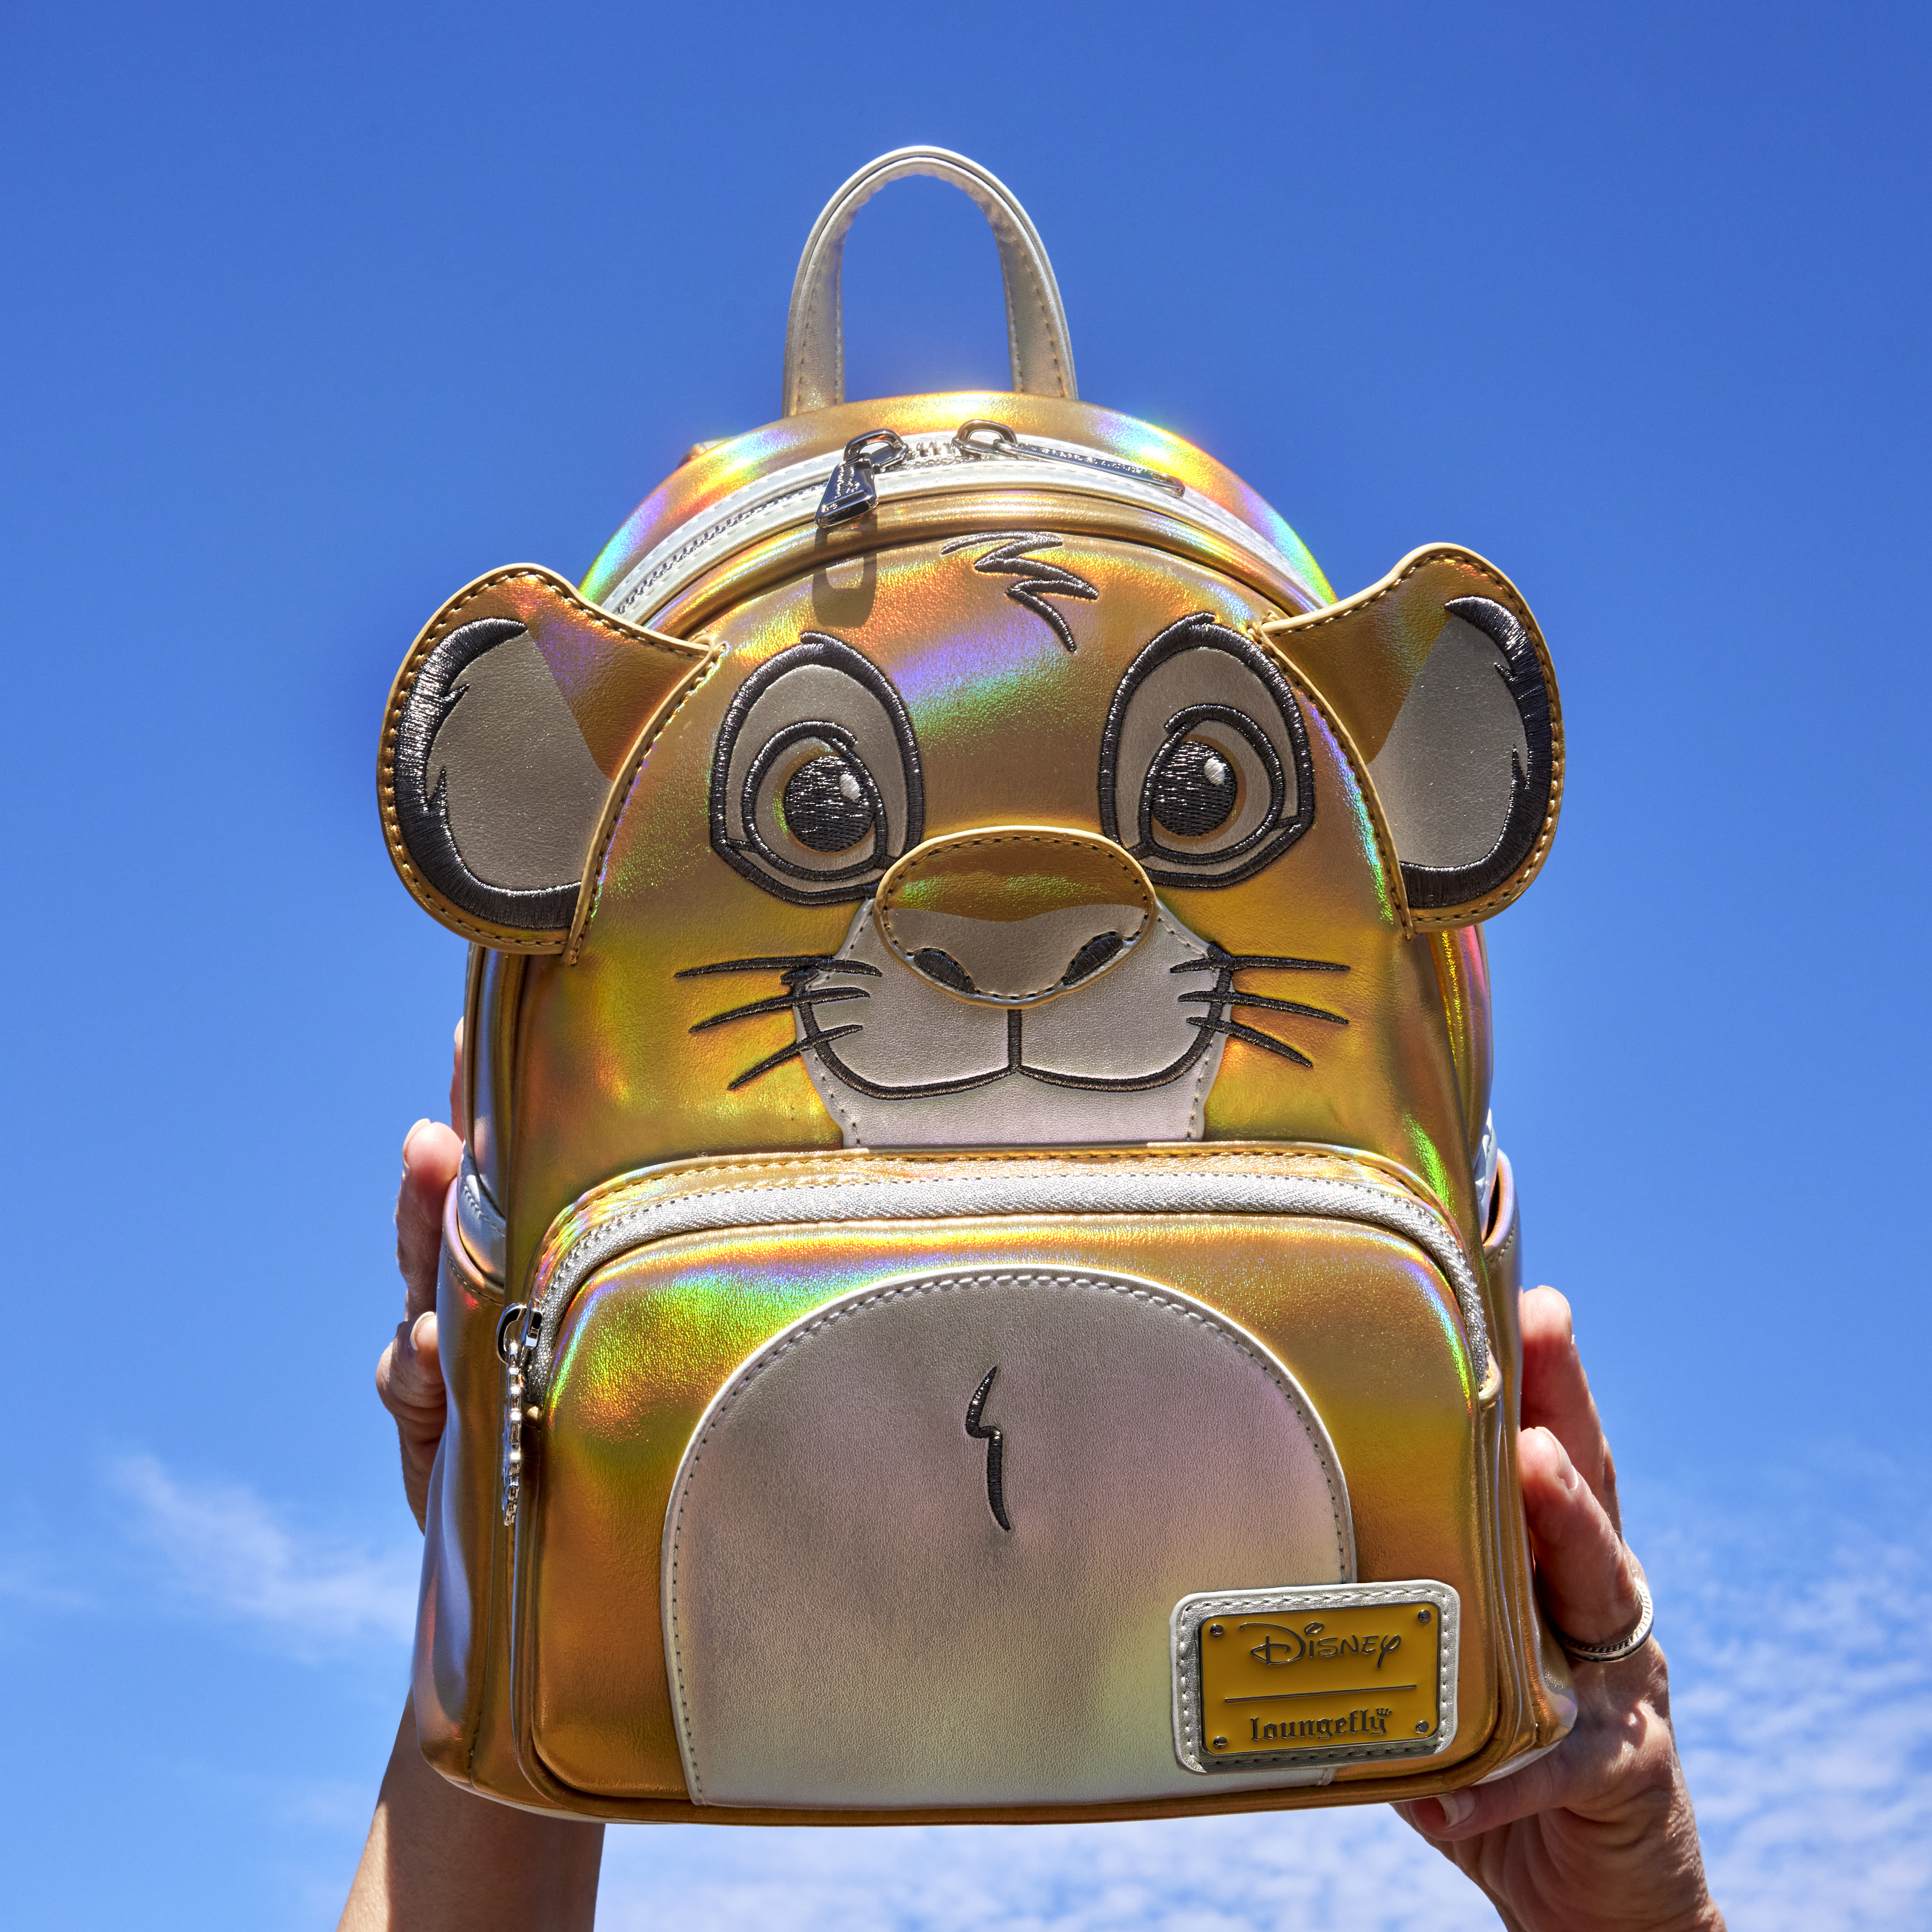 A pair of hands holds the Loungefly Disney100 Platinum Simba Cosplay Mini Backpack against a blue cloudy sky. The backpack shows Simba's lion cub face with shiny metallic details.